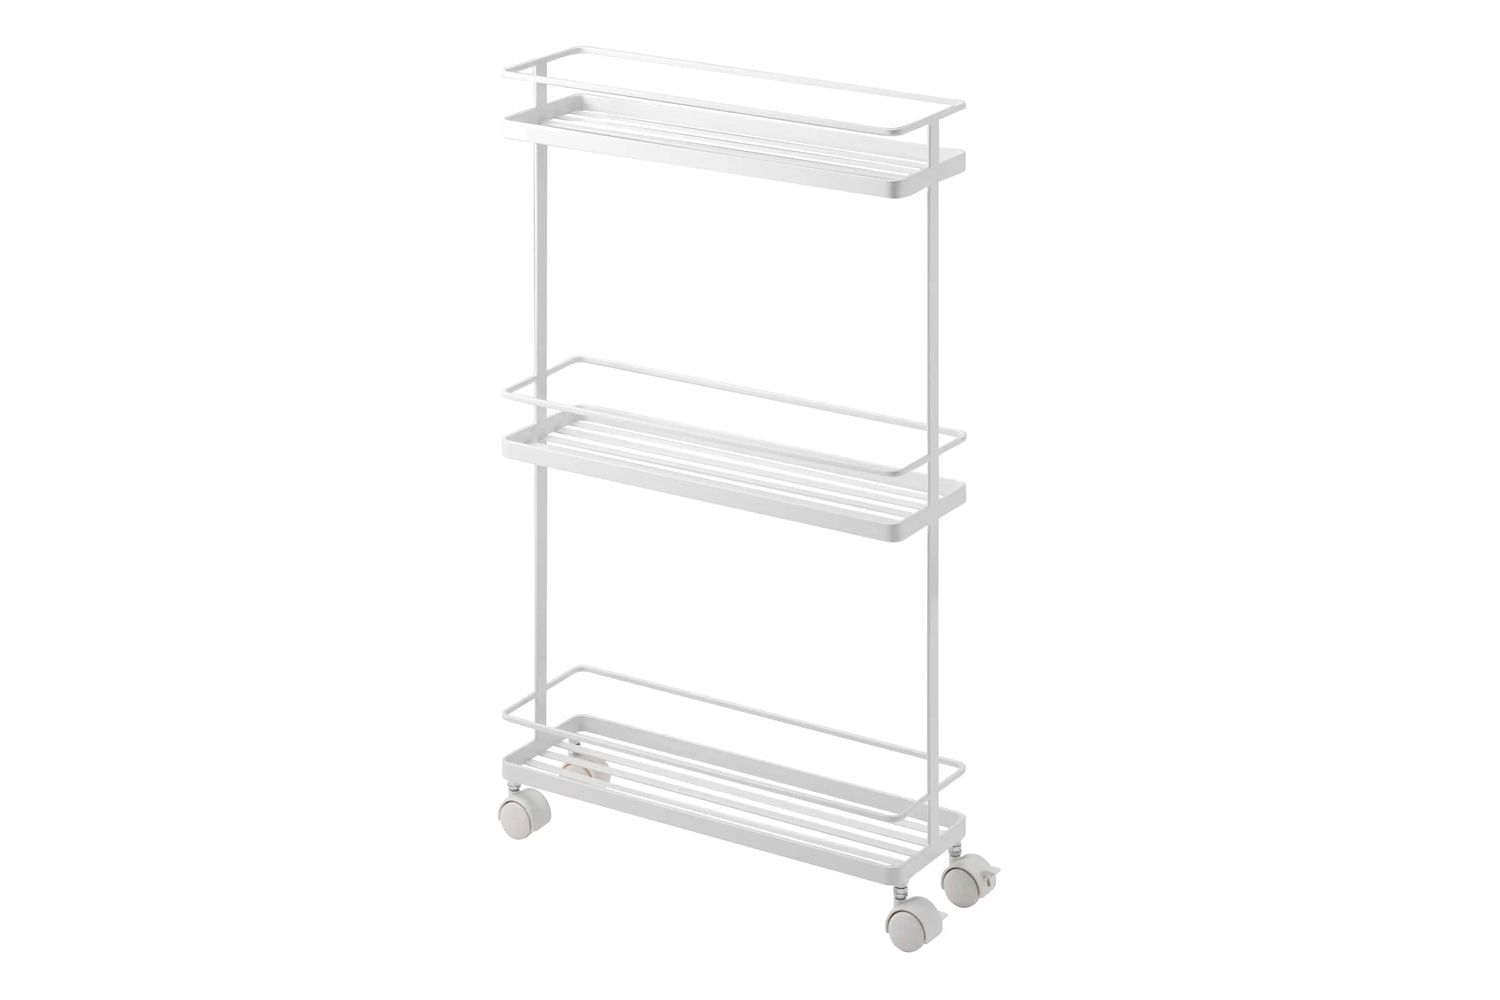 The Container Store Yamazaki Tower Rolling Cart White